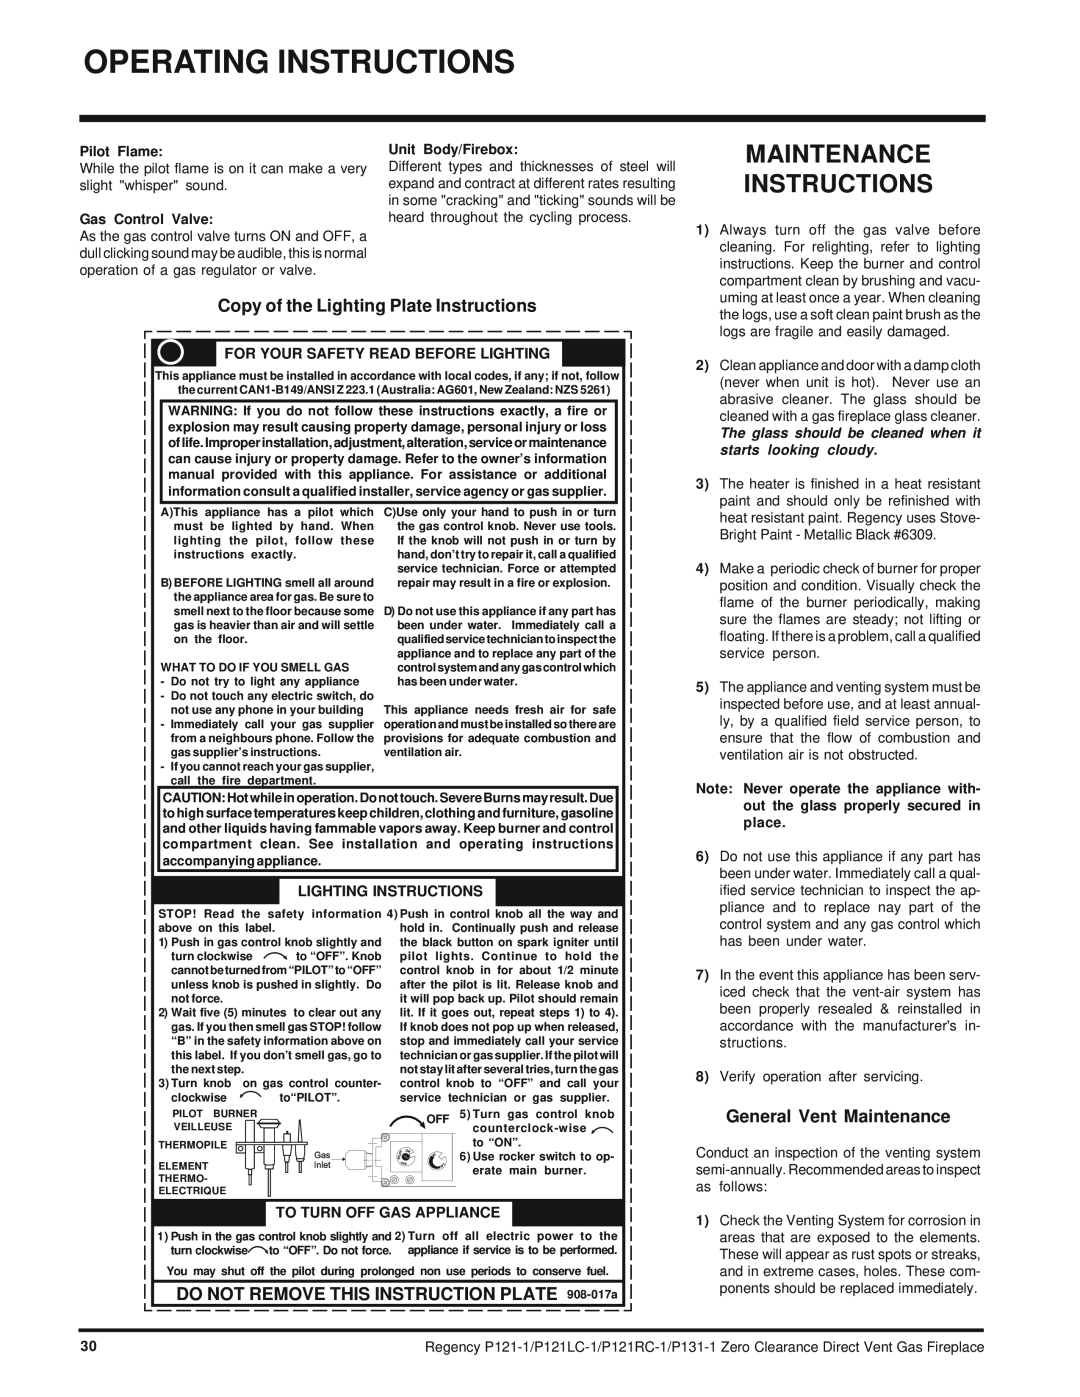 Regency P121LC, P121RC, P131 Operating Instructions, Maintenance Instructions, Copy of the Lighting Plate Instructions 